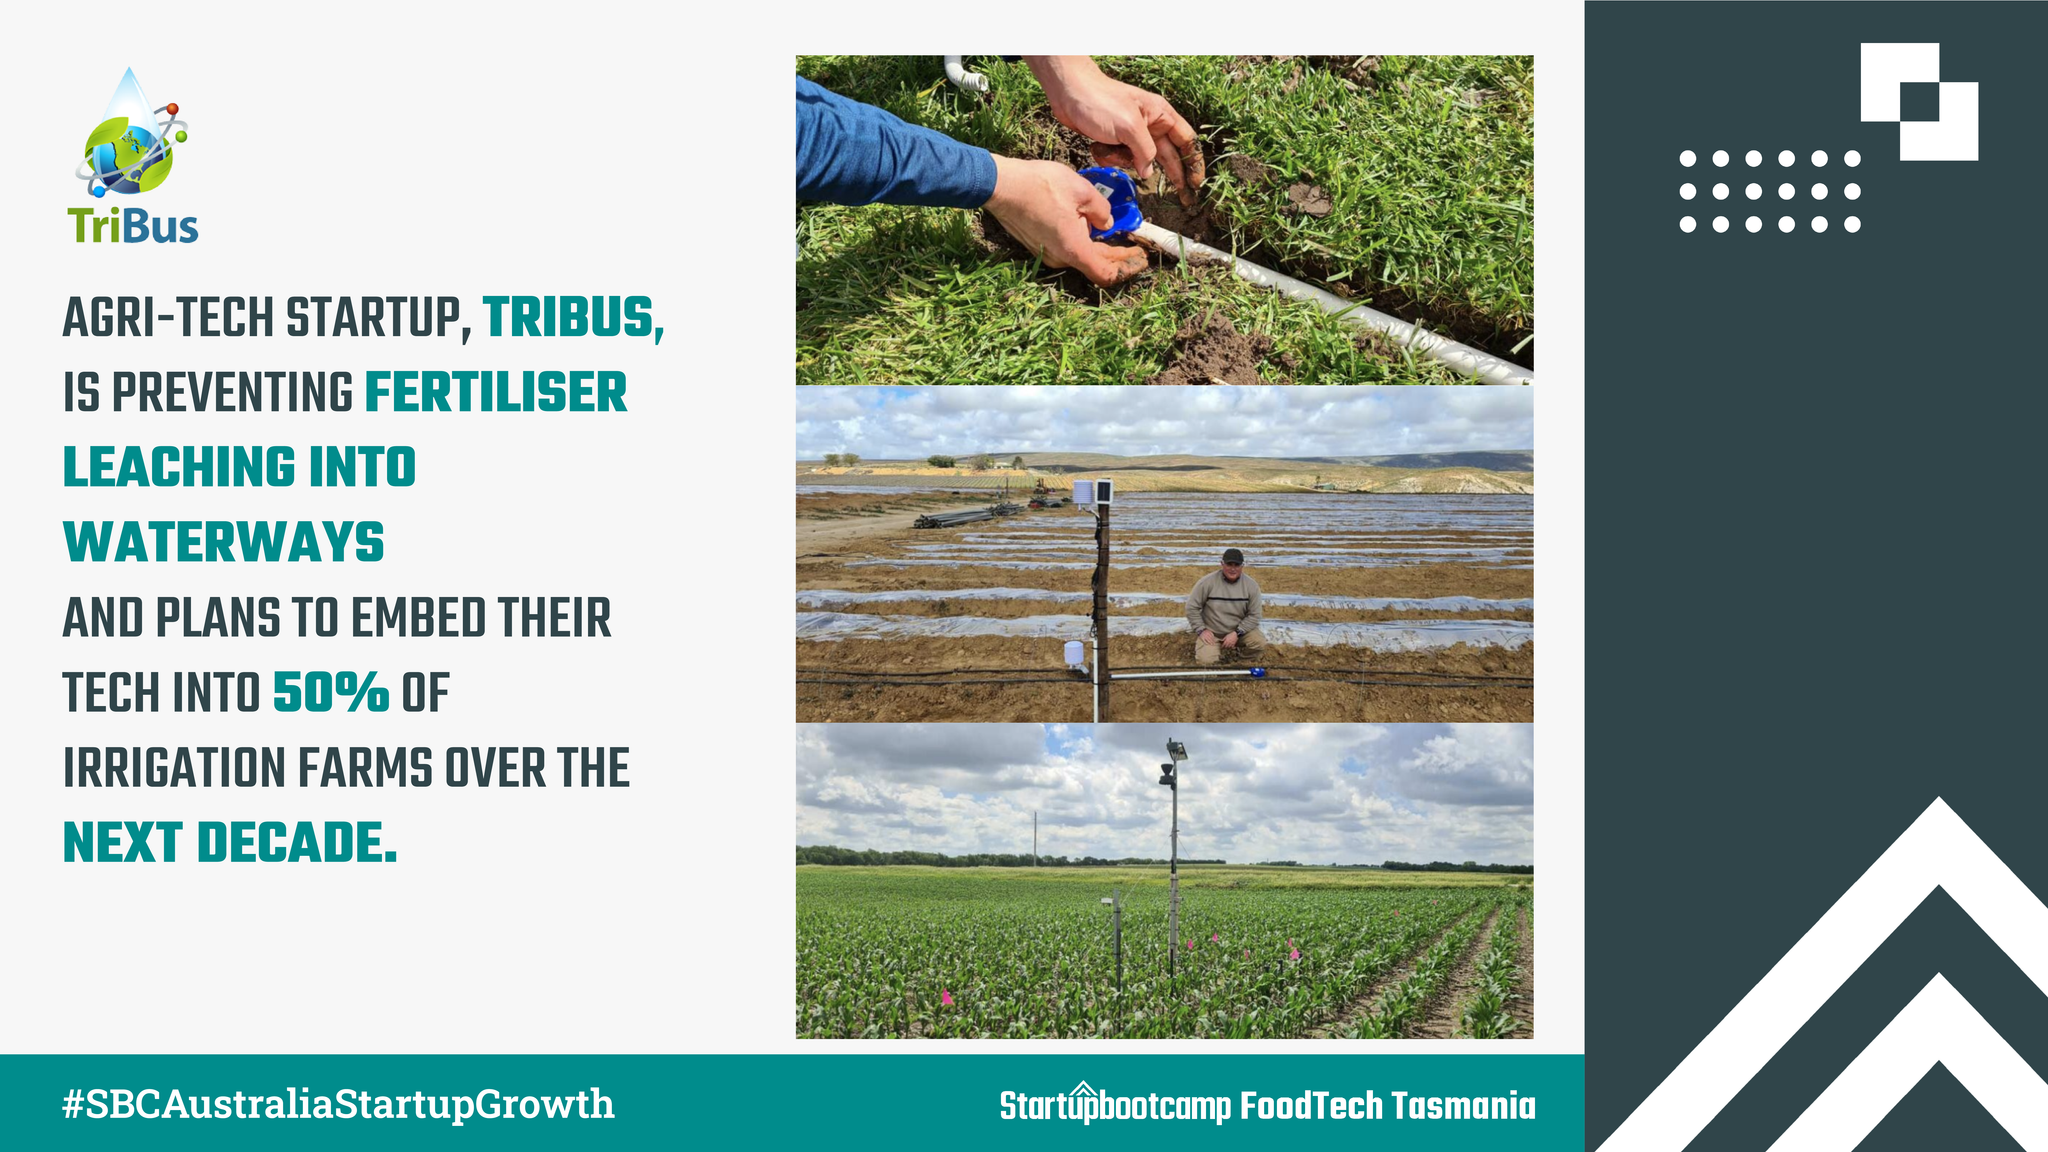 TriBus, the Startup Making Every Drop Count in Sustainable Farming